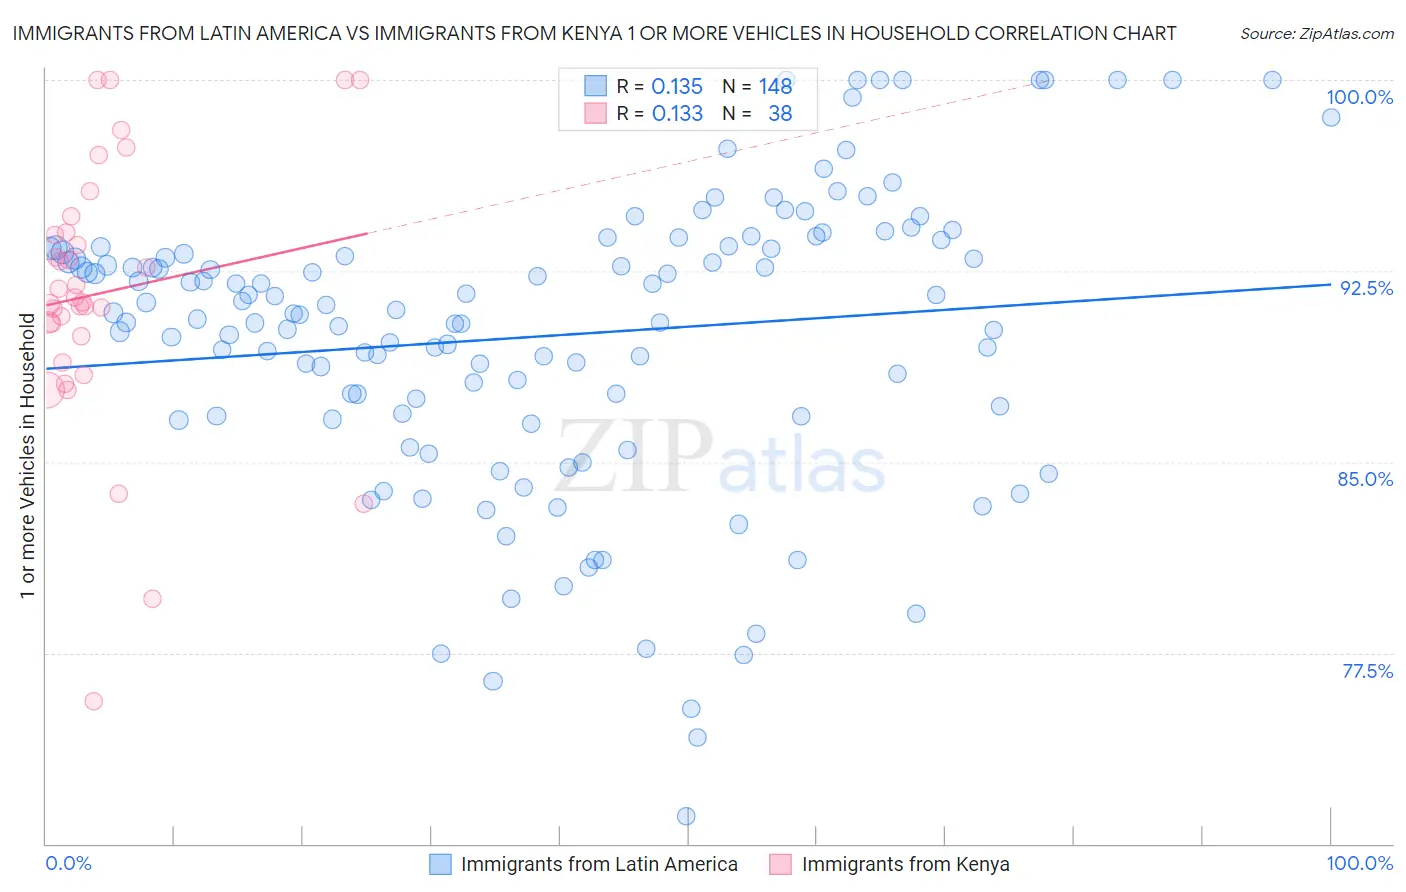 Immigrants from Latin America vs Immigrants from Kenya 1 or more Vehicles in Household